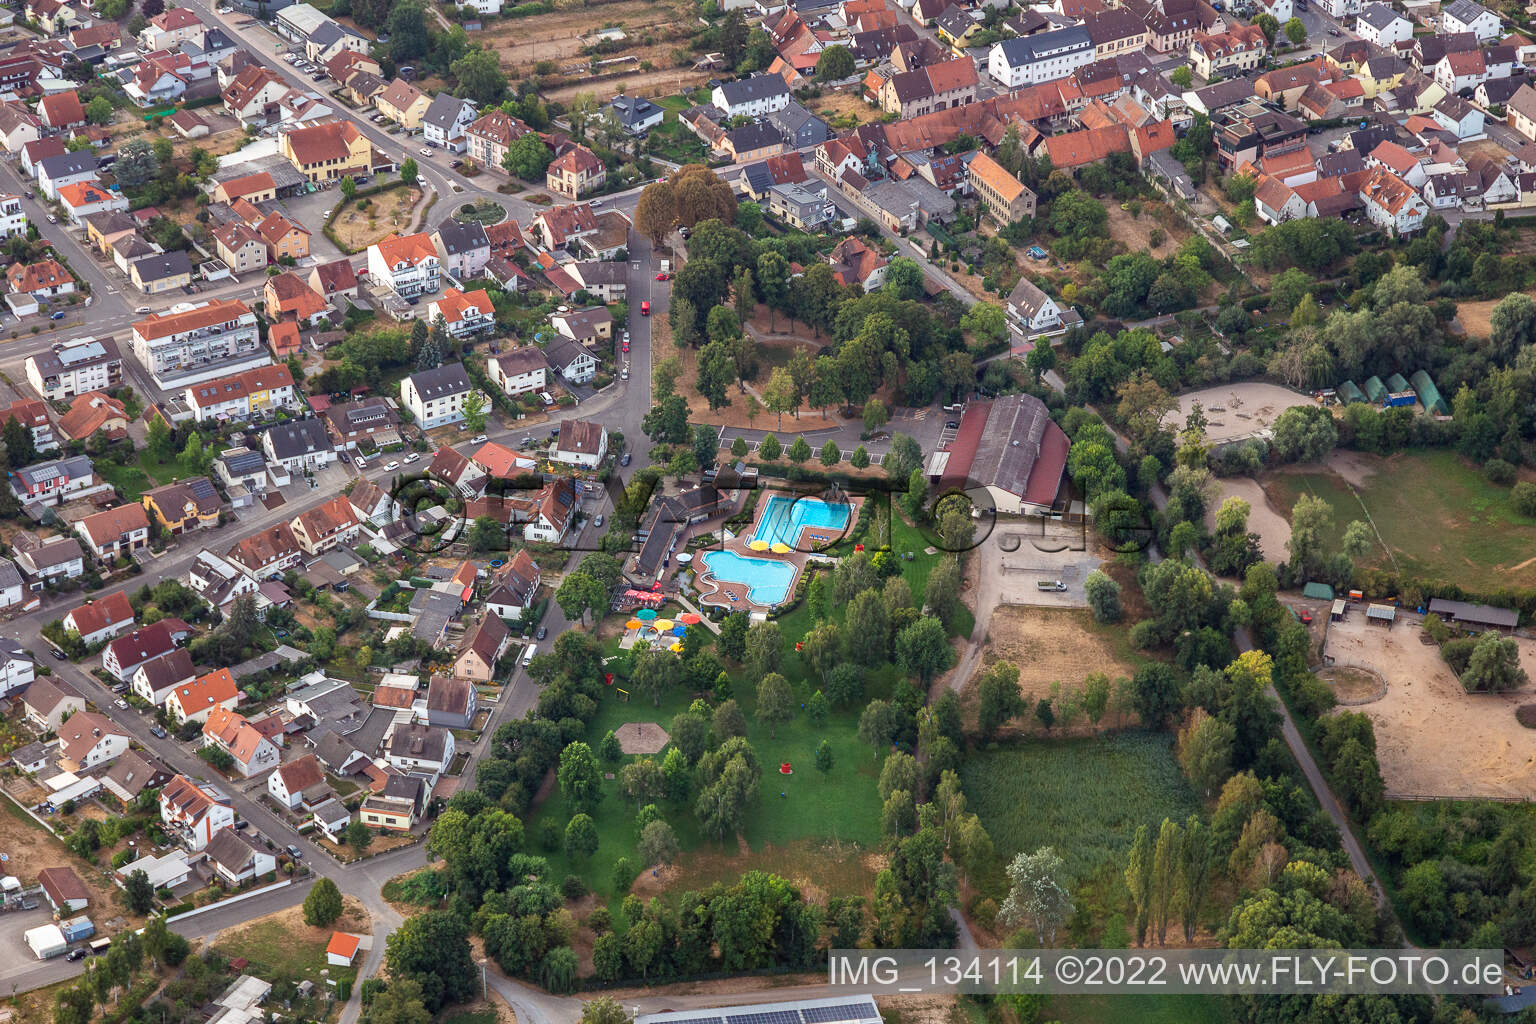 Outdoor swimming pool Graben-Neudorf in the district Graben in Graben-Neudorf in the state Baden-Wuerttemberg, Germany